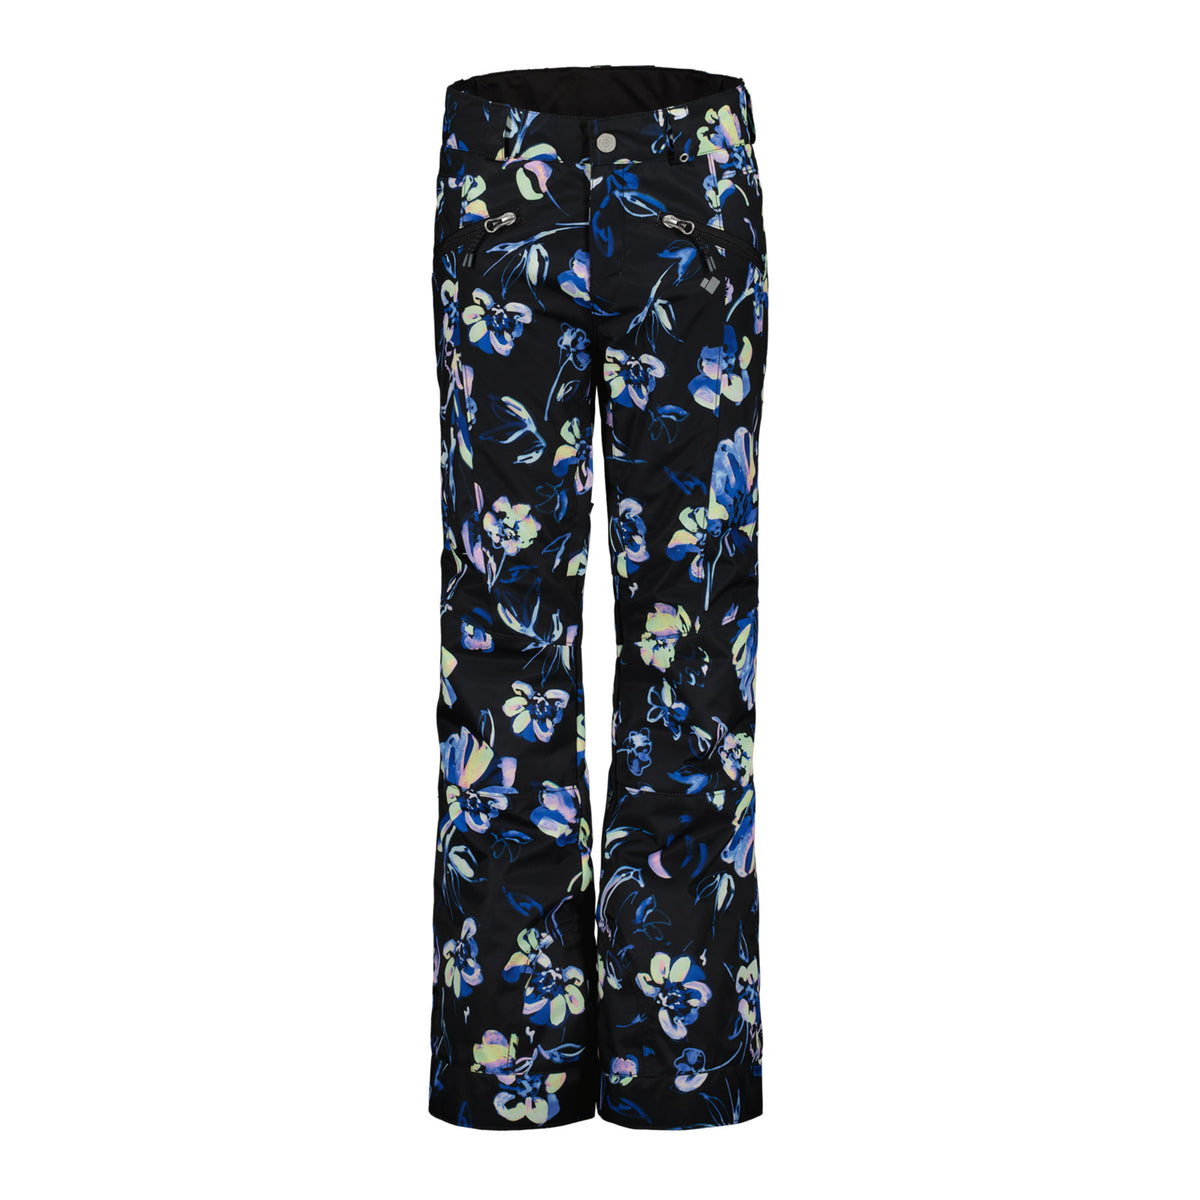 Hero image featuring the Obermeyer Jessi Print Pant in black with tropical colored flowers.